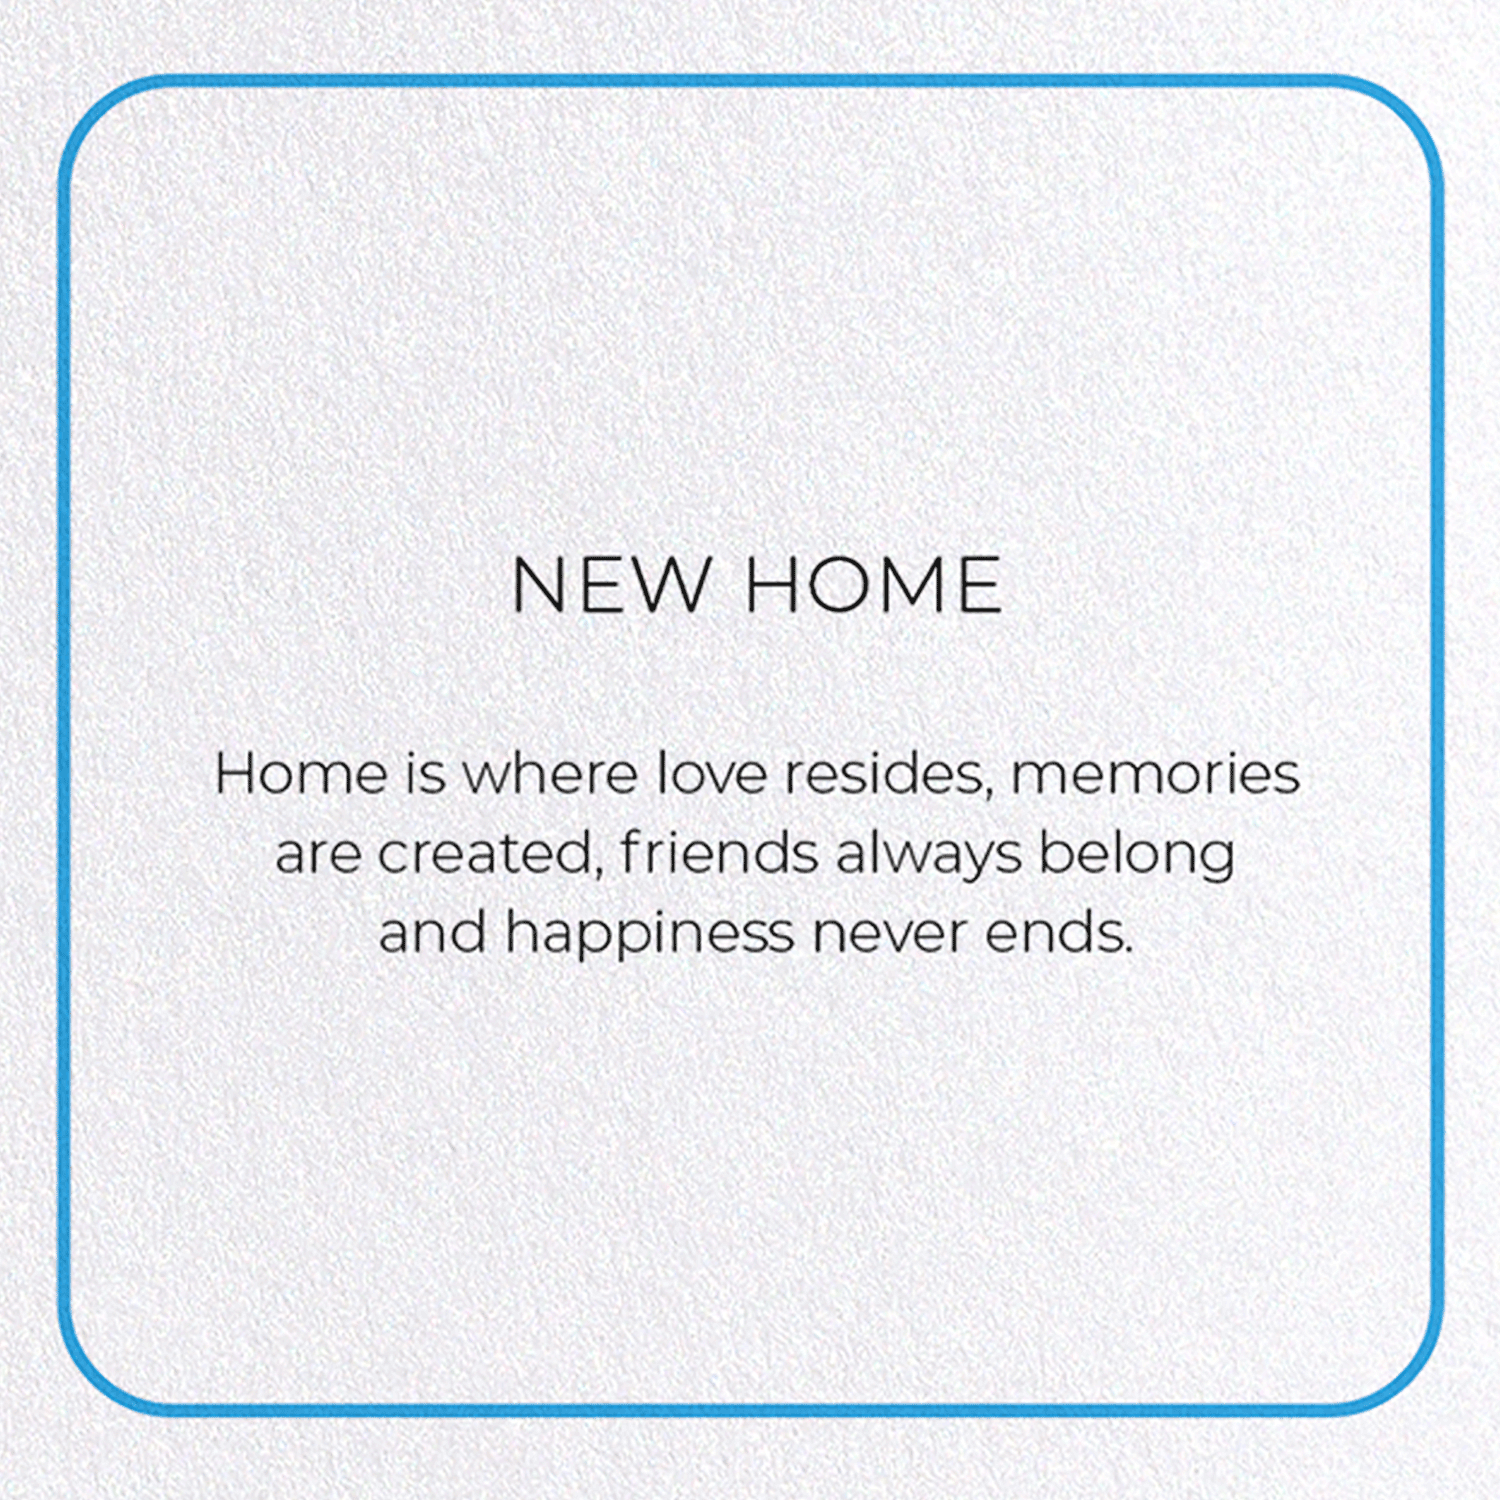 NEW HOME: Photo Greeting Card